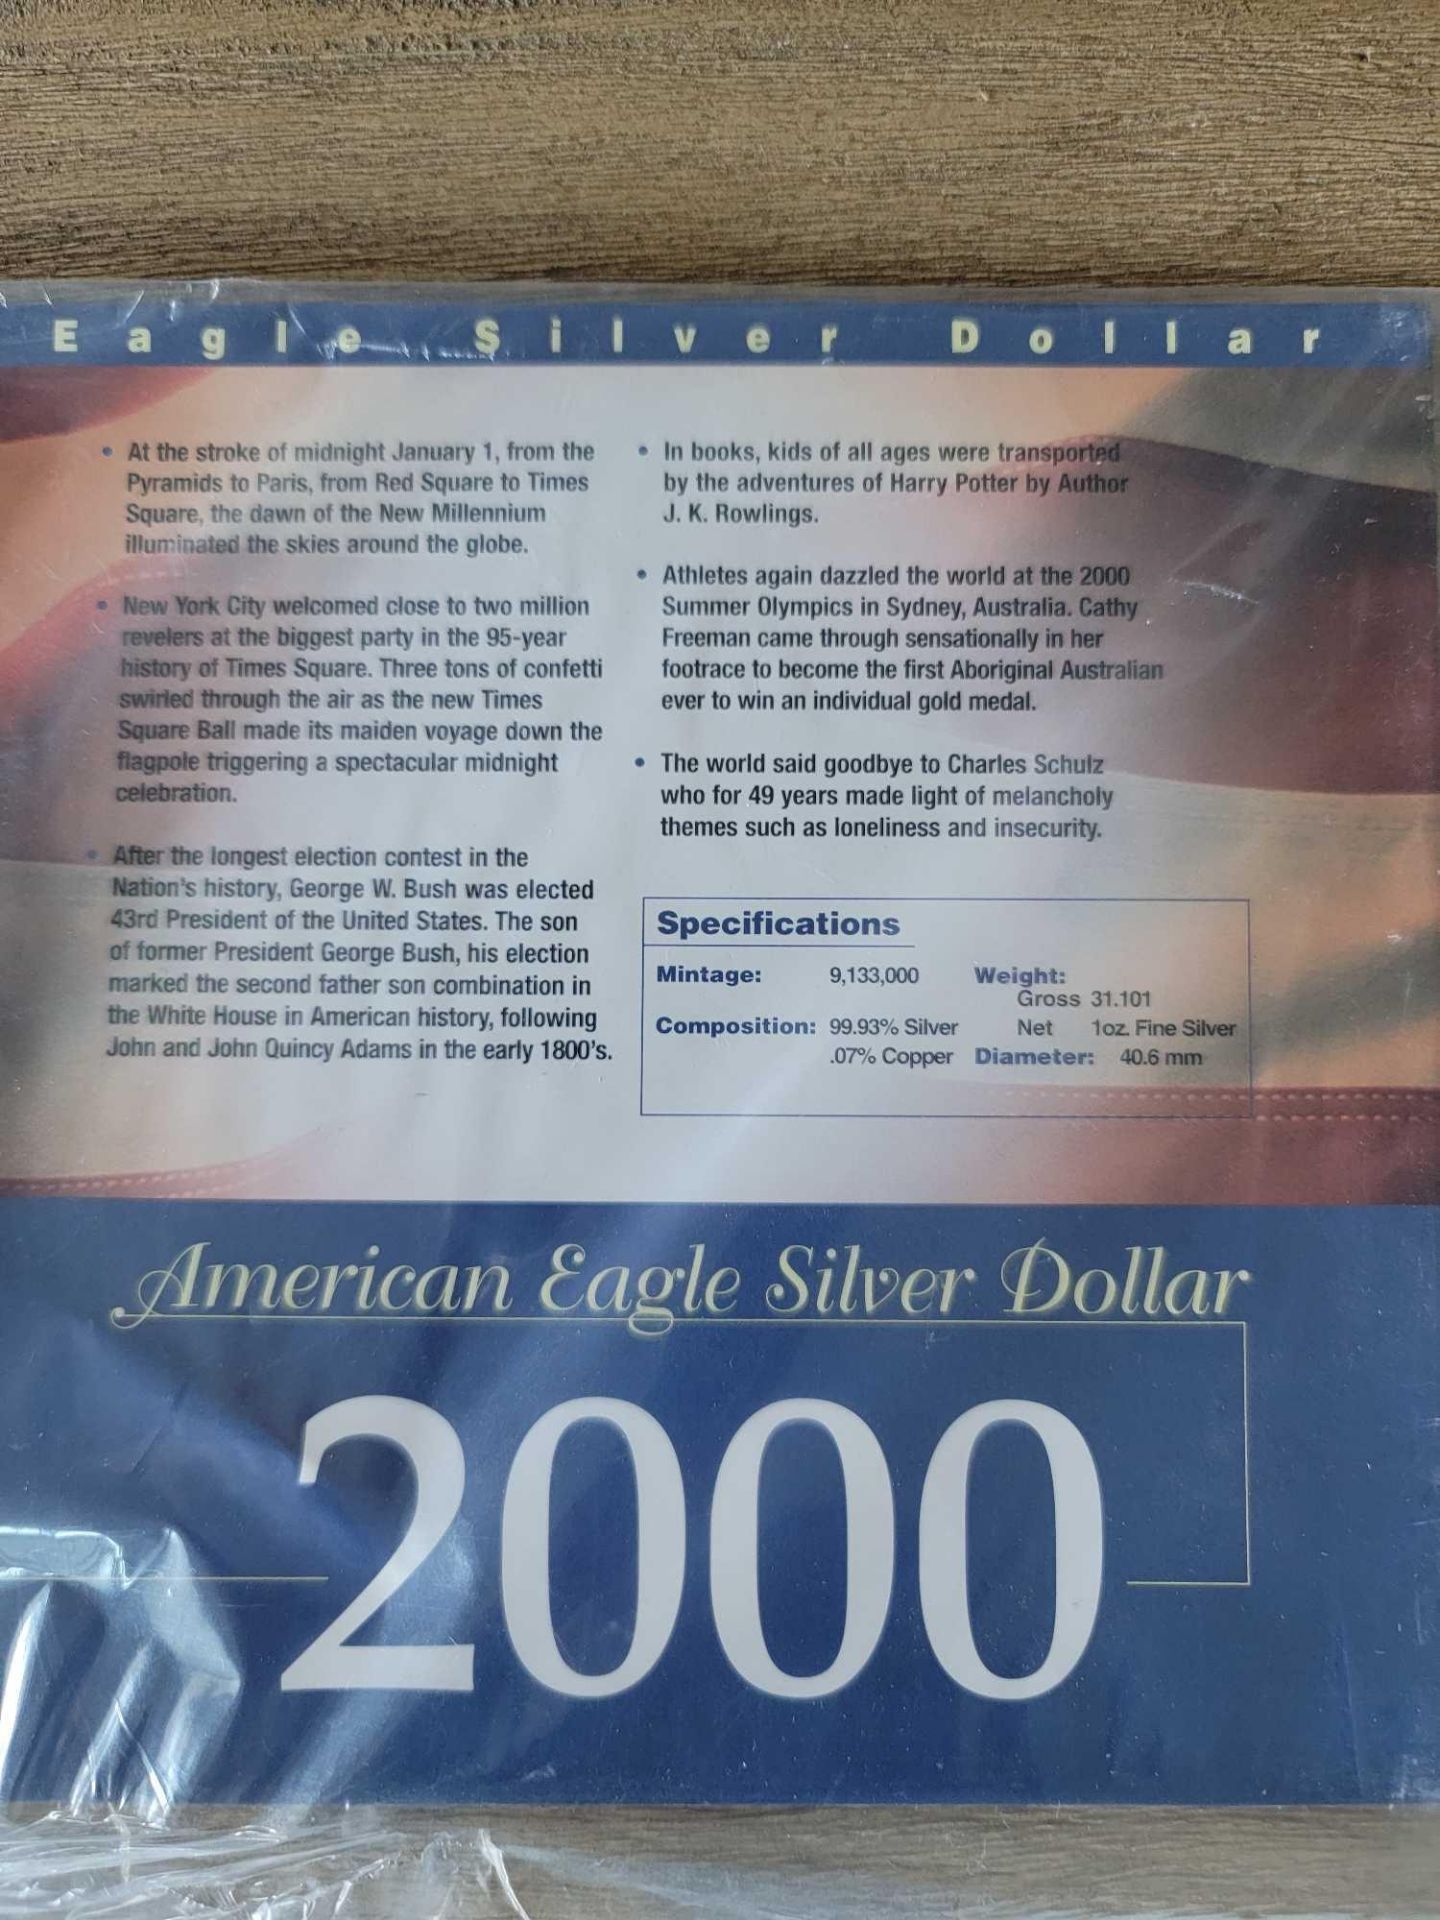 2000 Colored Silver Eagle with Sleeve of Facts - Image 5 of 8